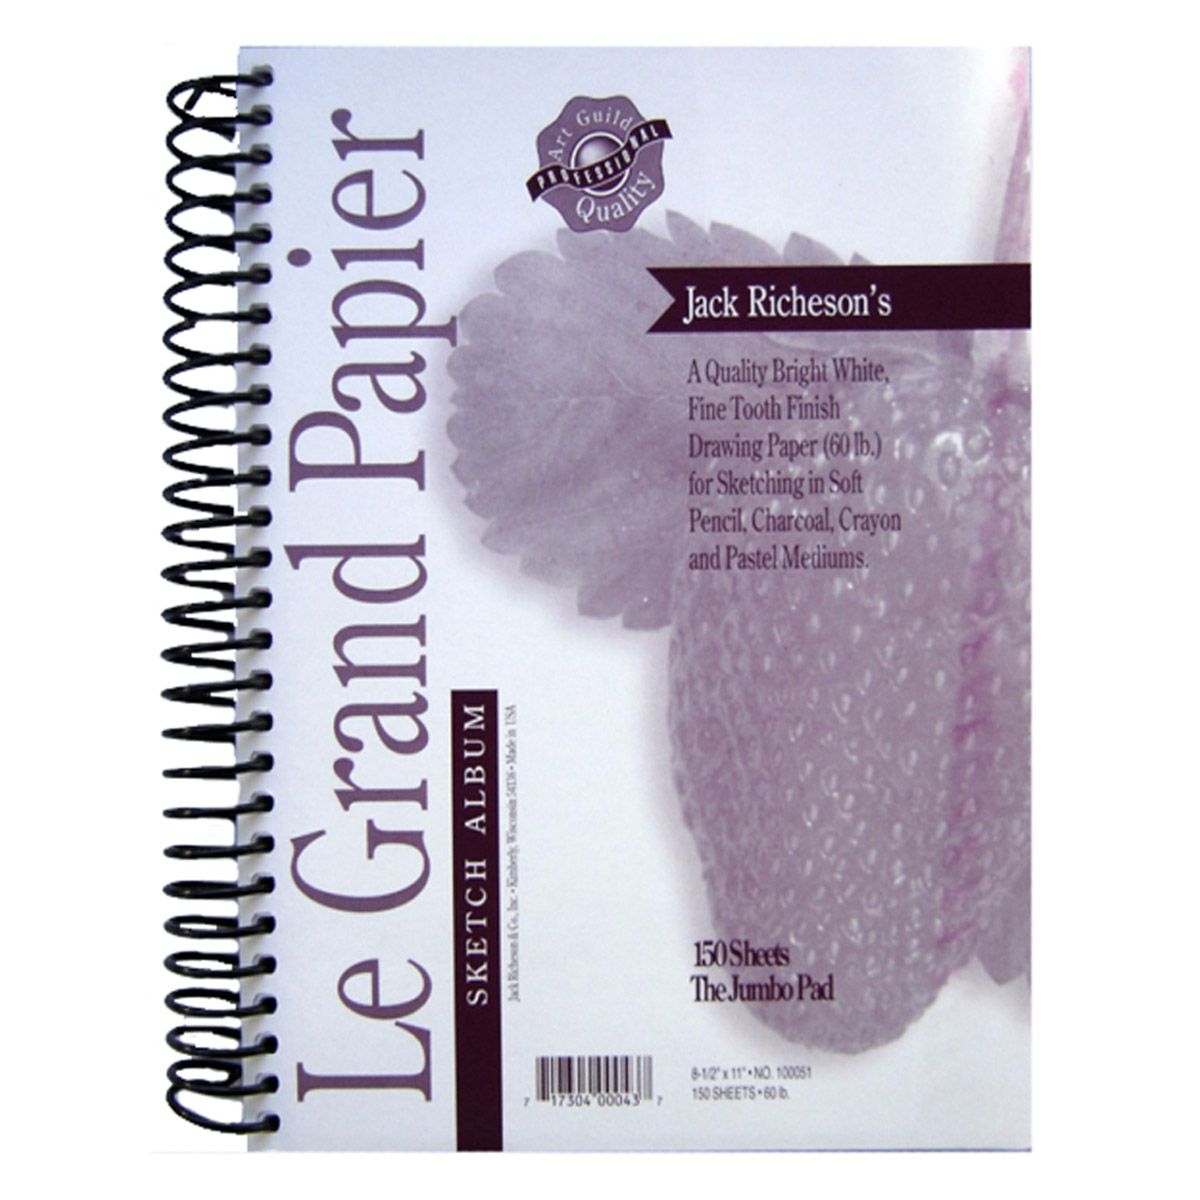 Jack Richeson Le Grand Papier Drawing Pad 8.5 x 11 inches